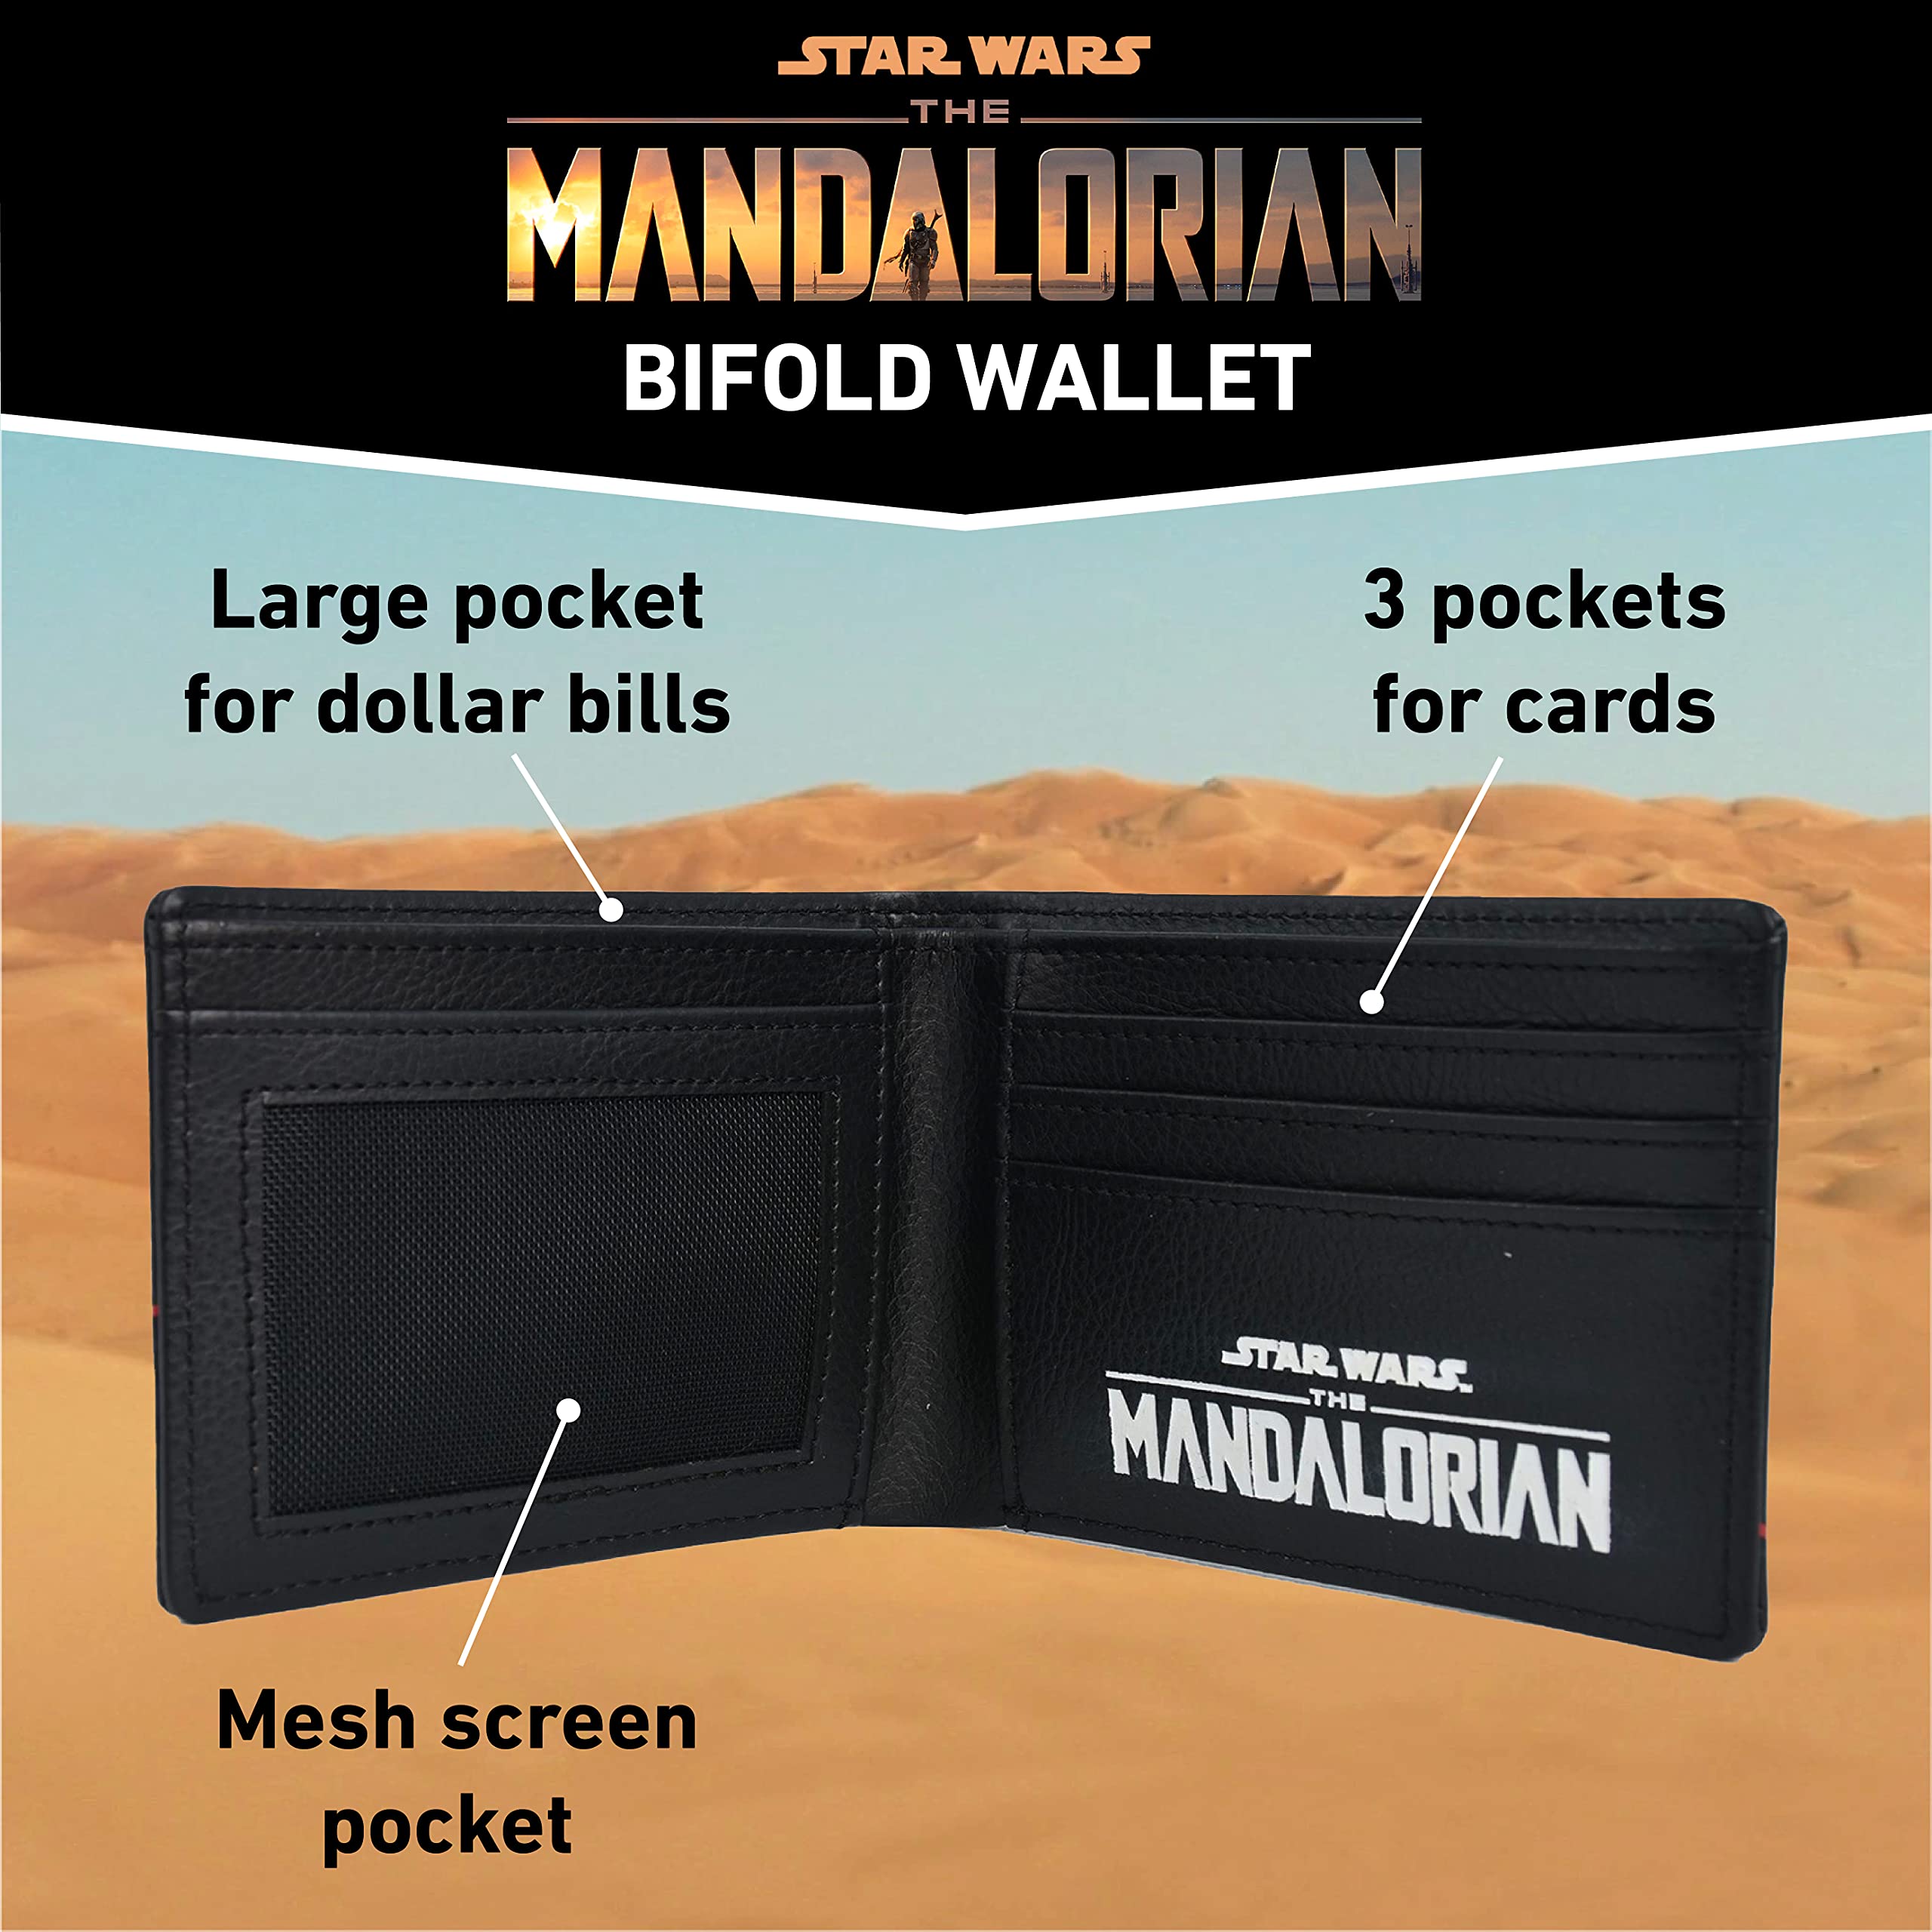 Star Wars The Mandalorian Wallet, Slim Bifold Wallet with Decorative Tin Case, Black and Red